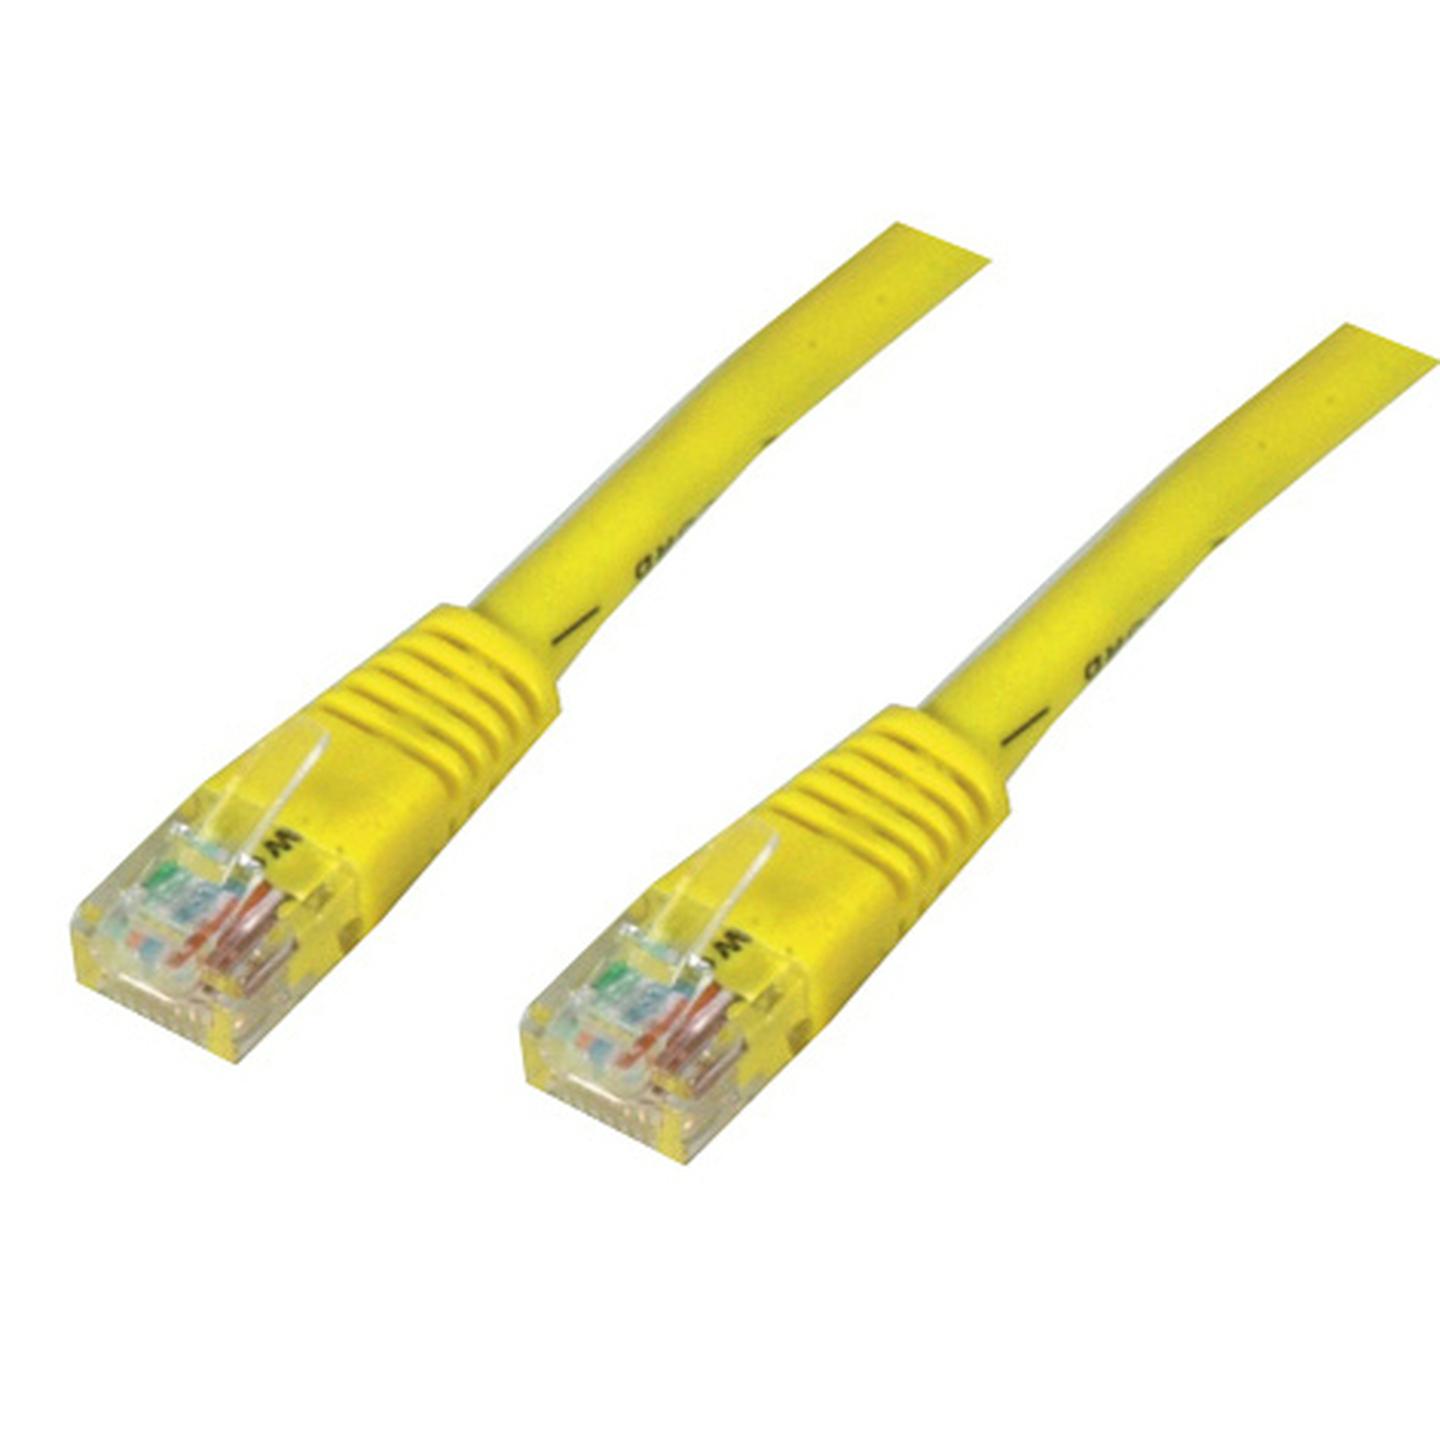 5m Cat5e Patch Cable - Yellow